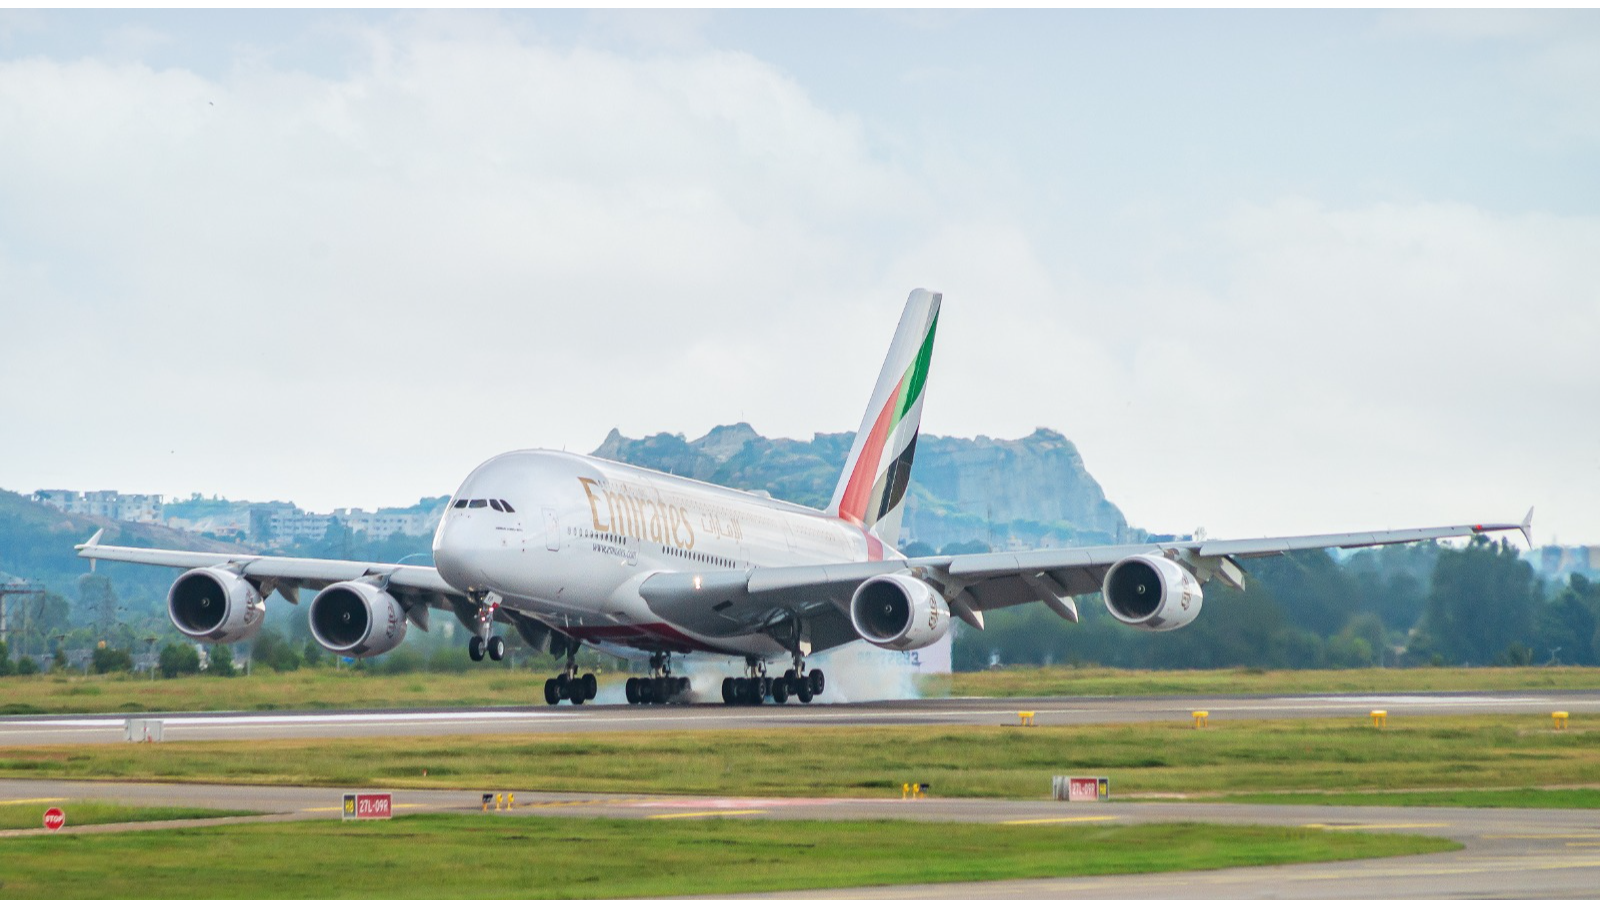 https://adgully.me/post/4195/emirates-celebrates-one-year-of-a380-operations-in-bengaluru